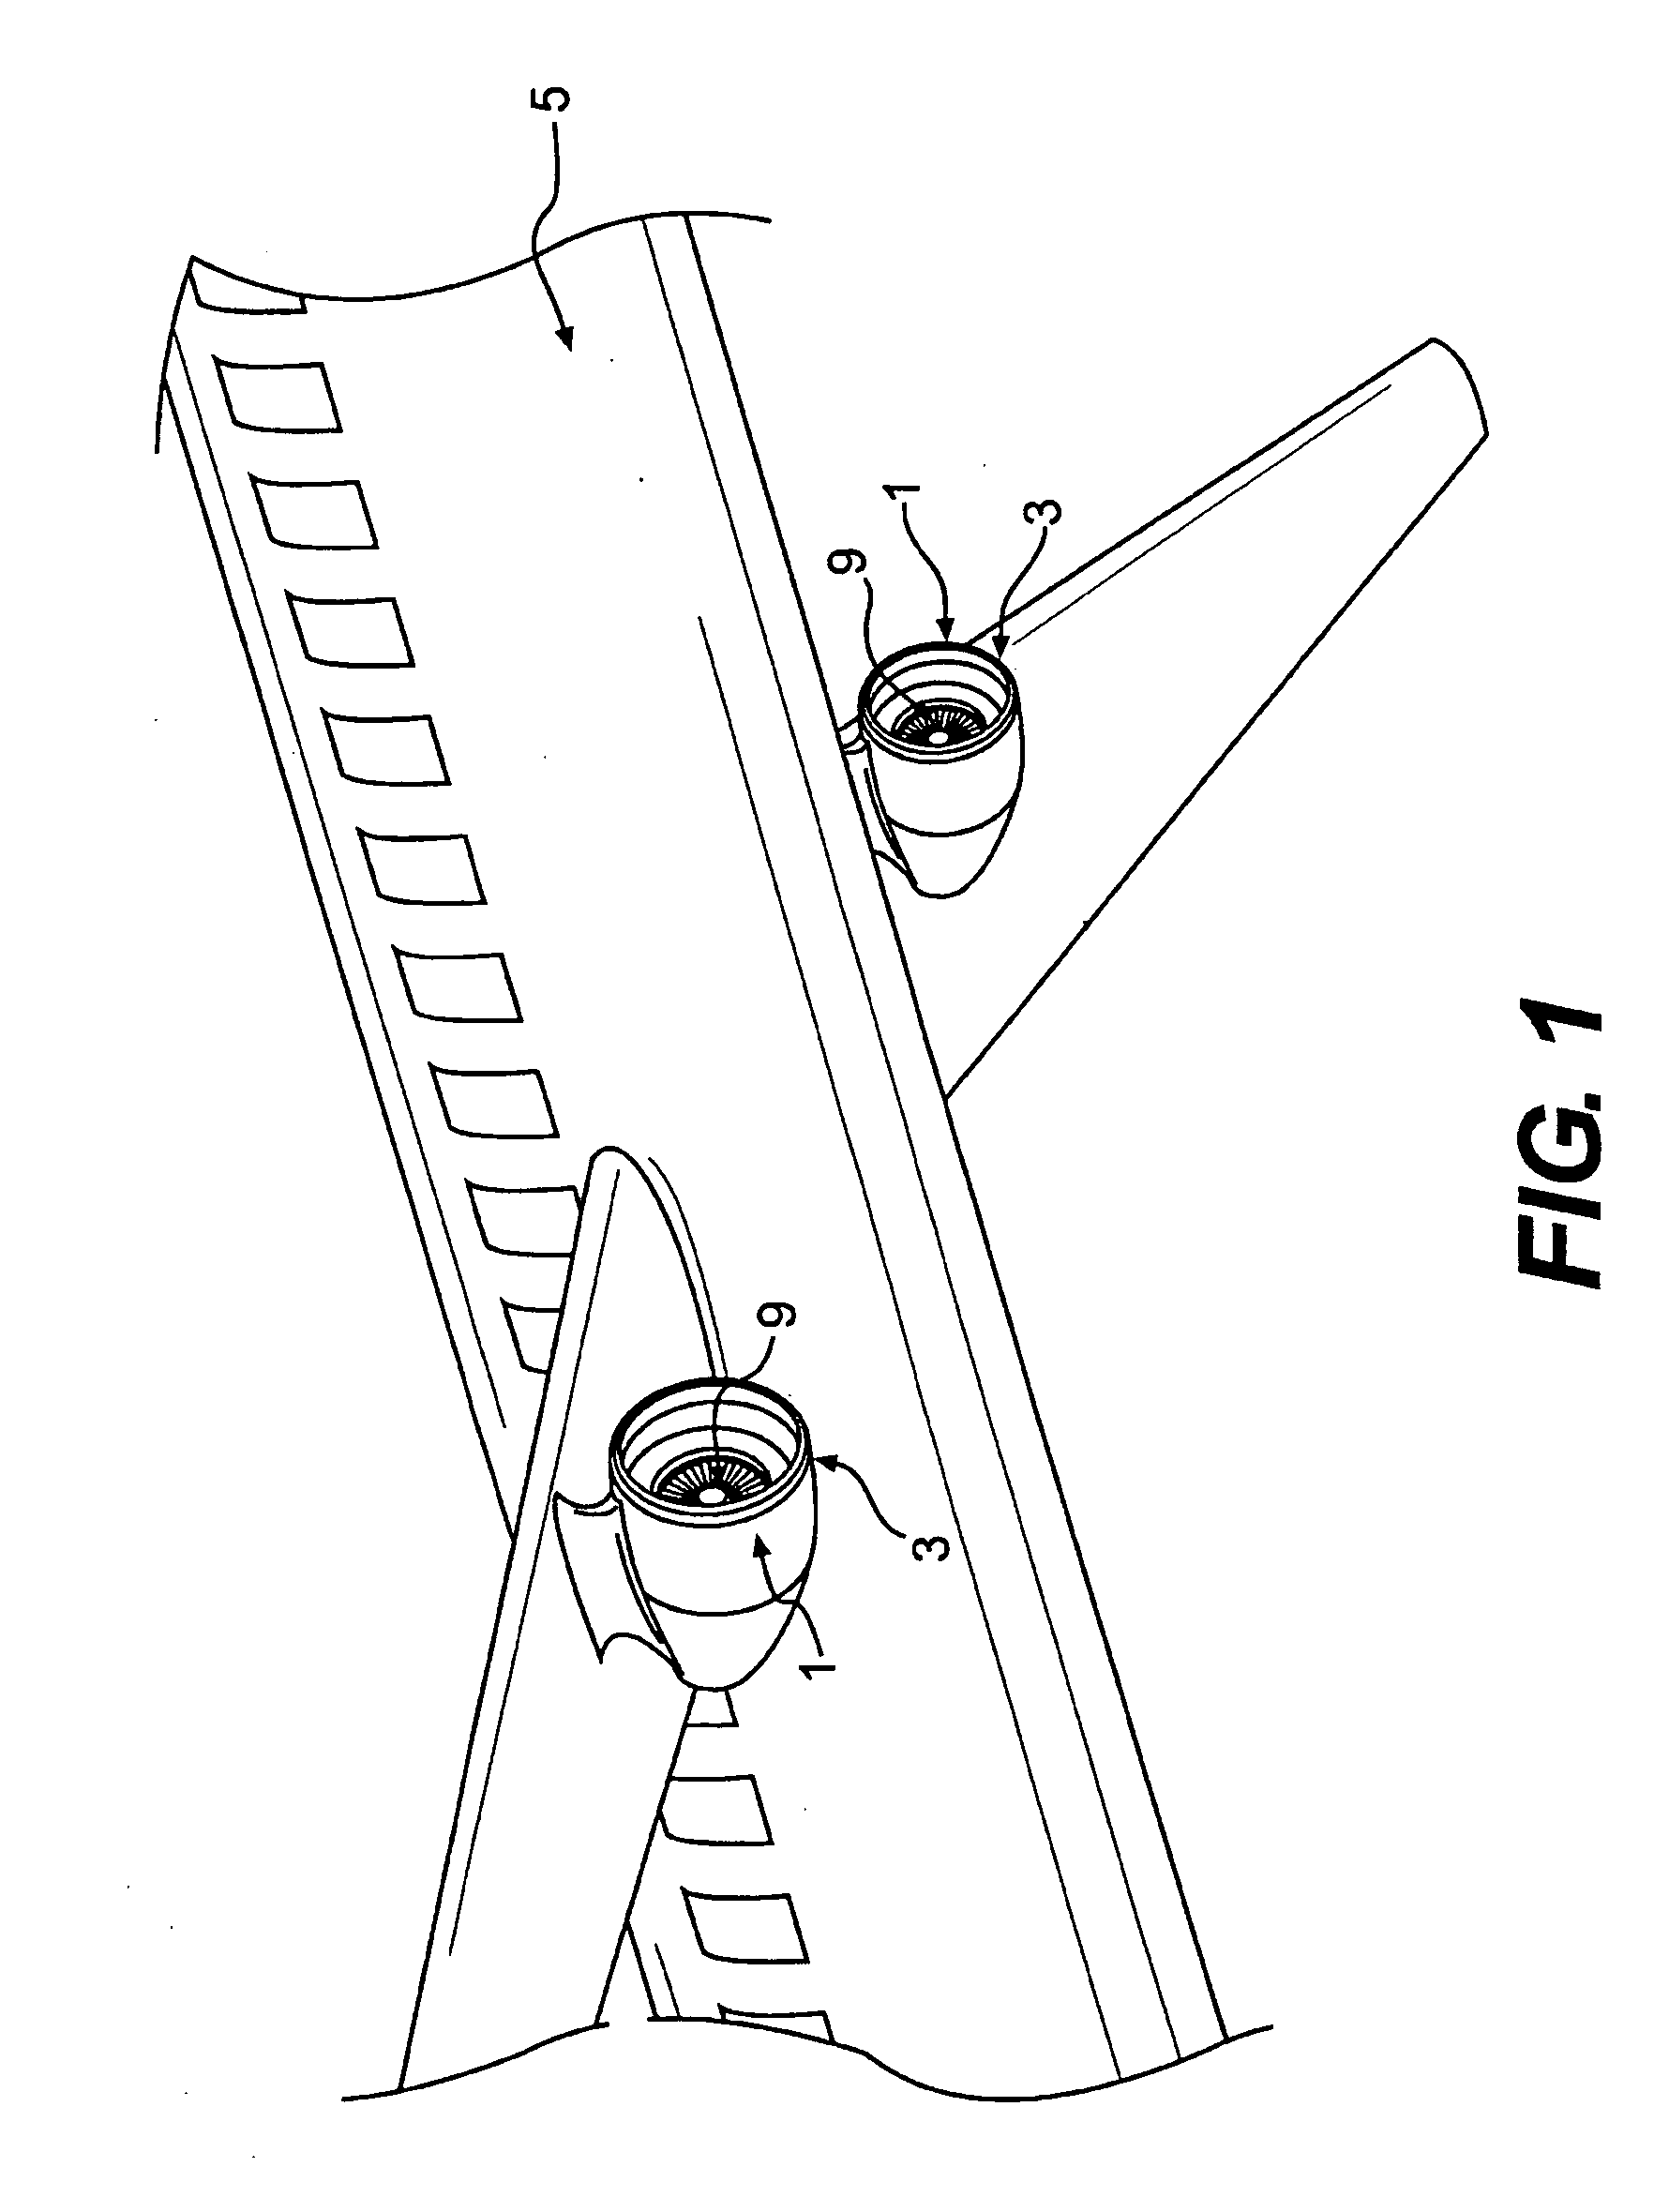 Aircraft engine inlet having zone of deformation